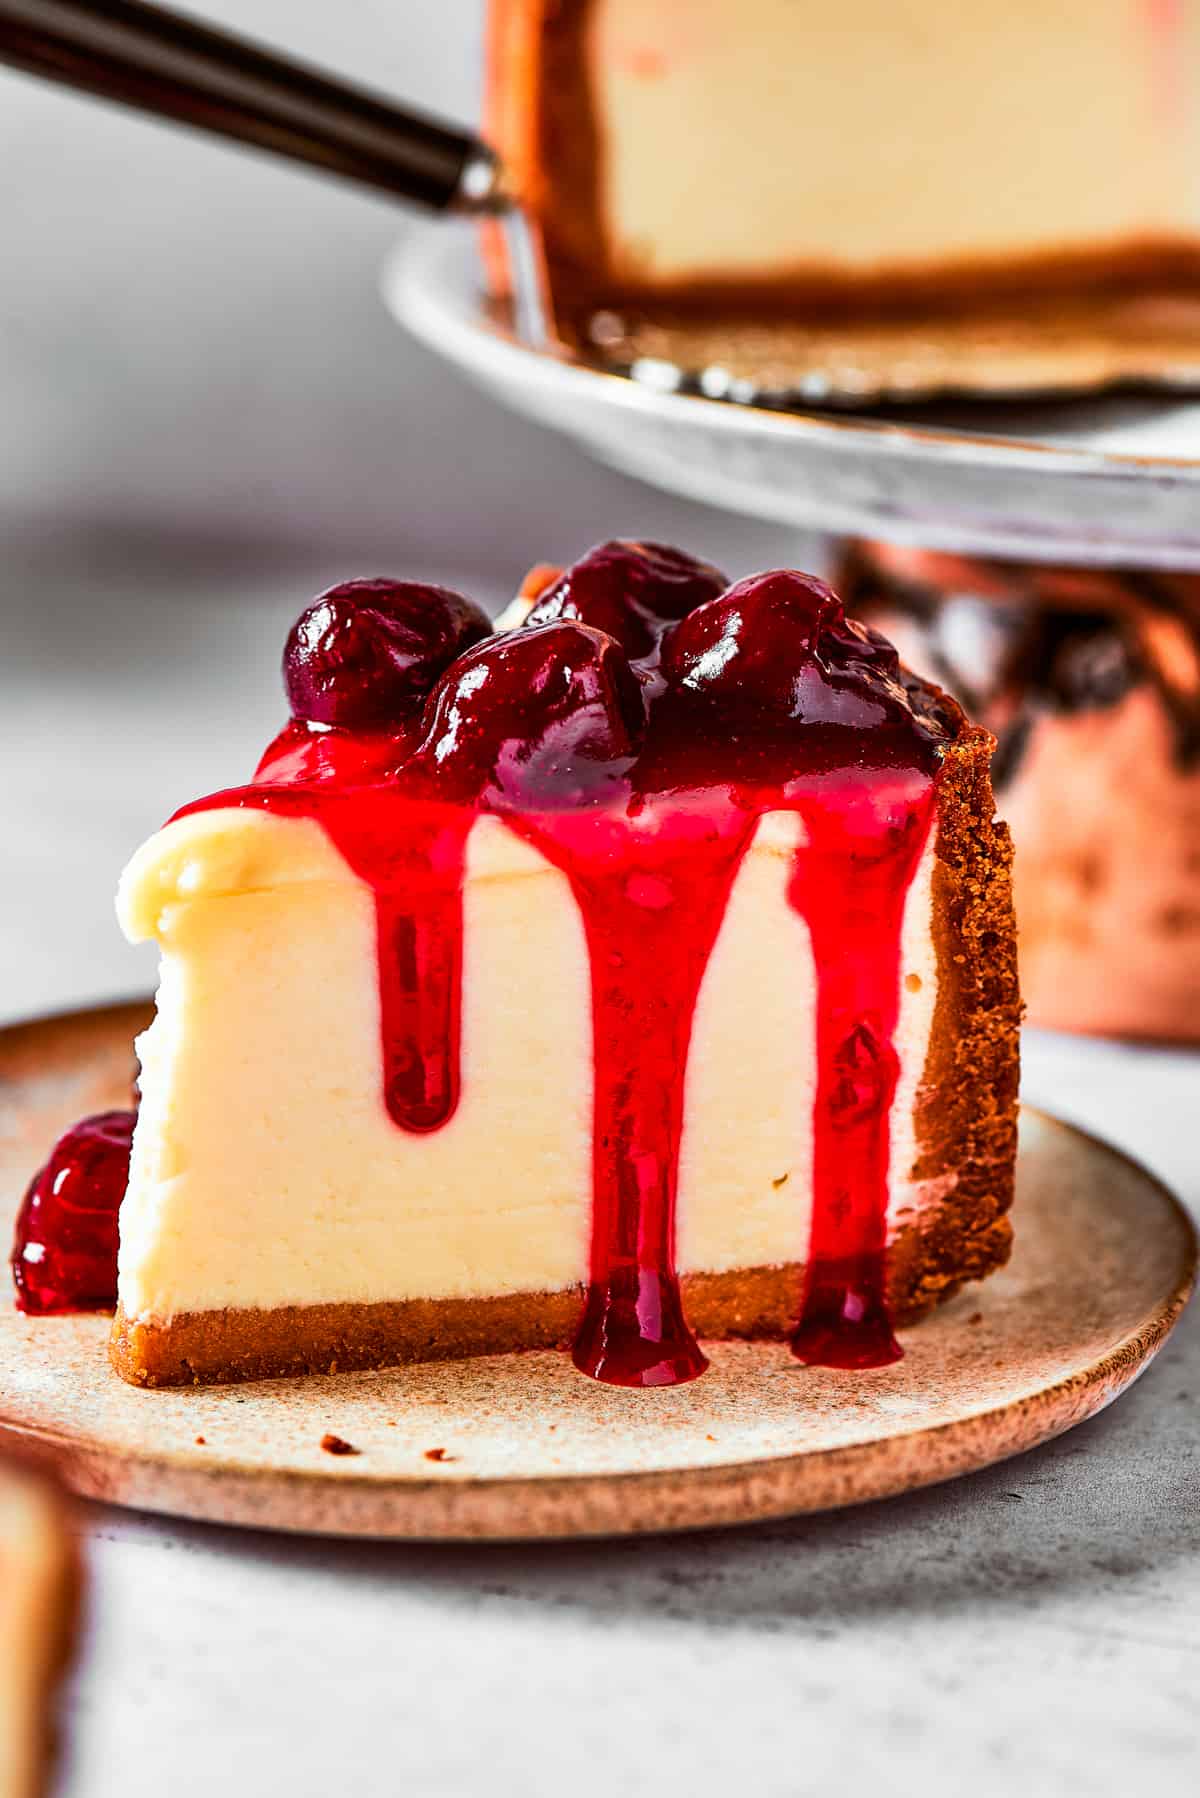 A slice of cherry cheesecake served on a small dessert plate.